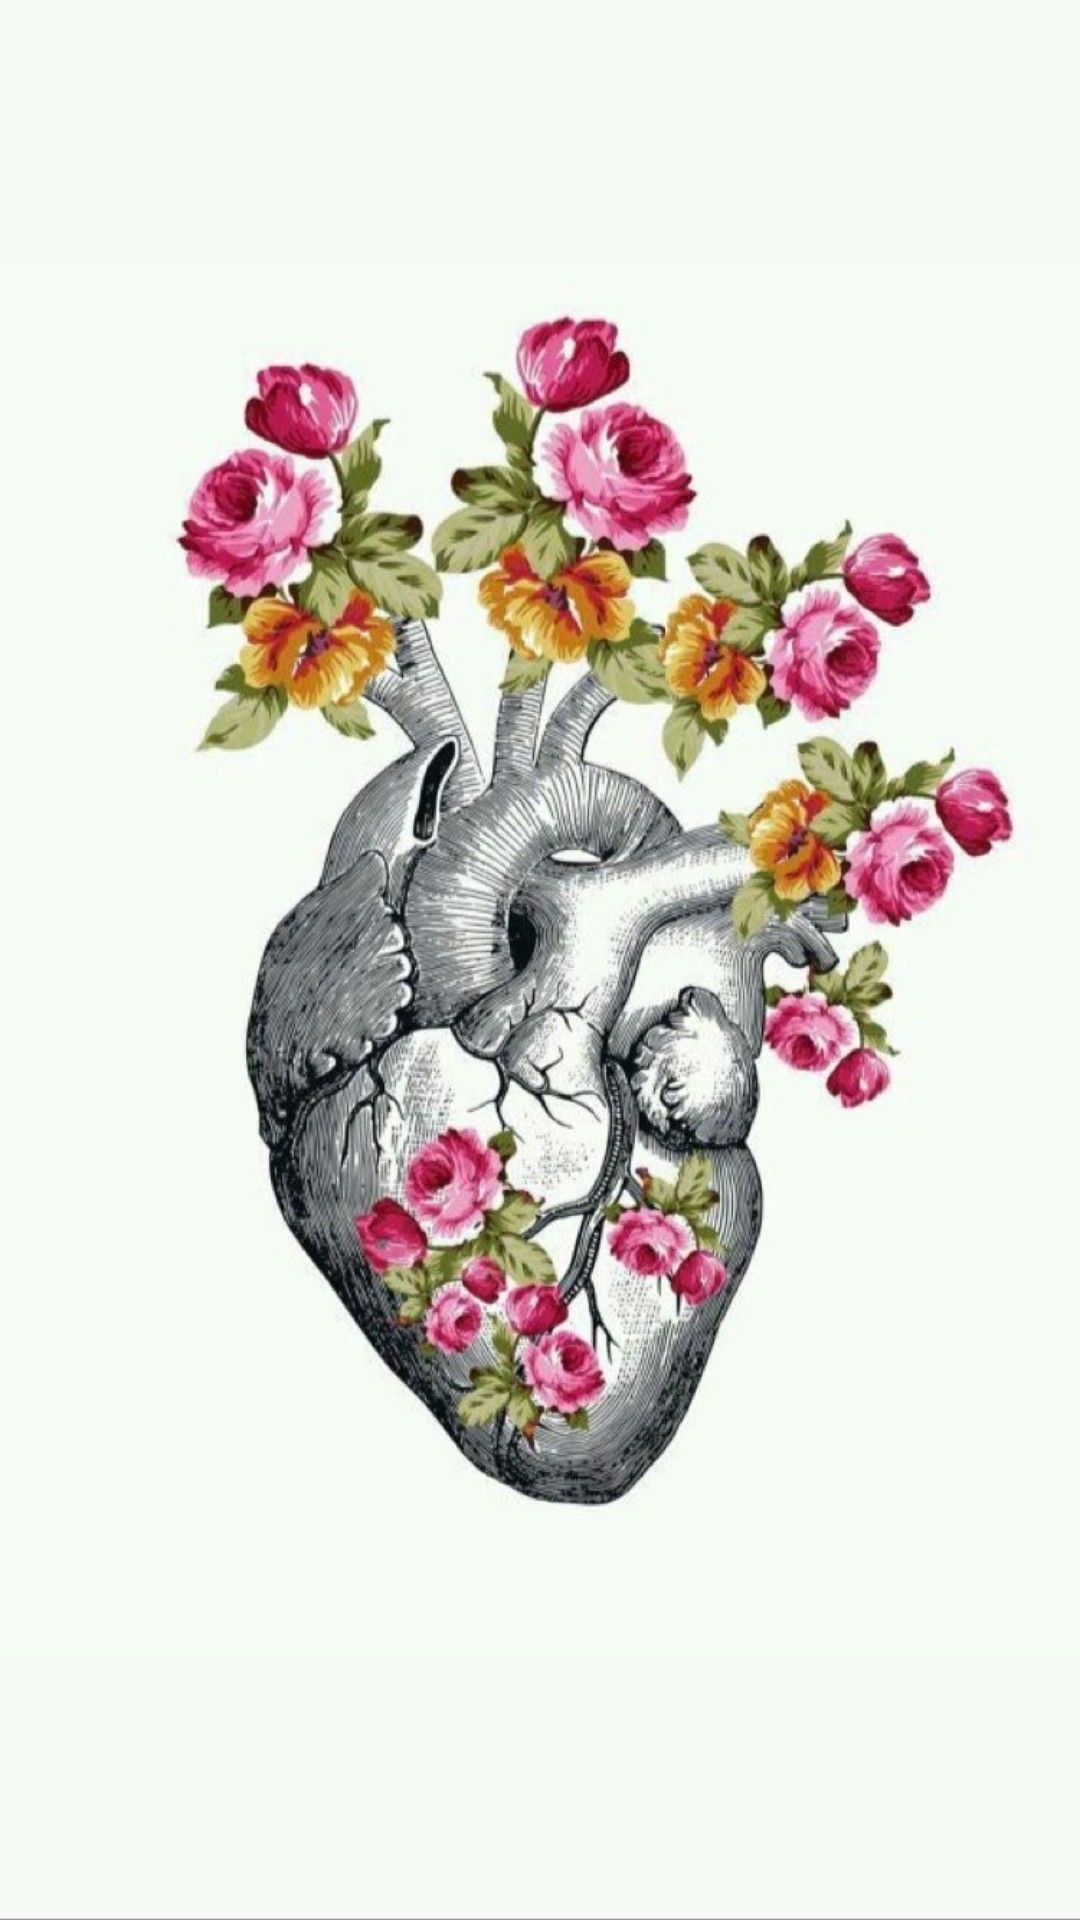 A heart with flowers on it - Medical